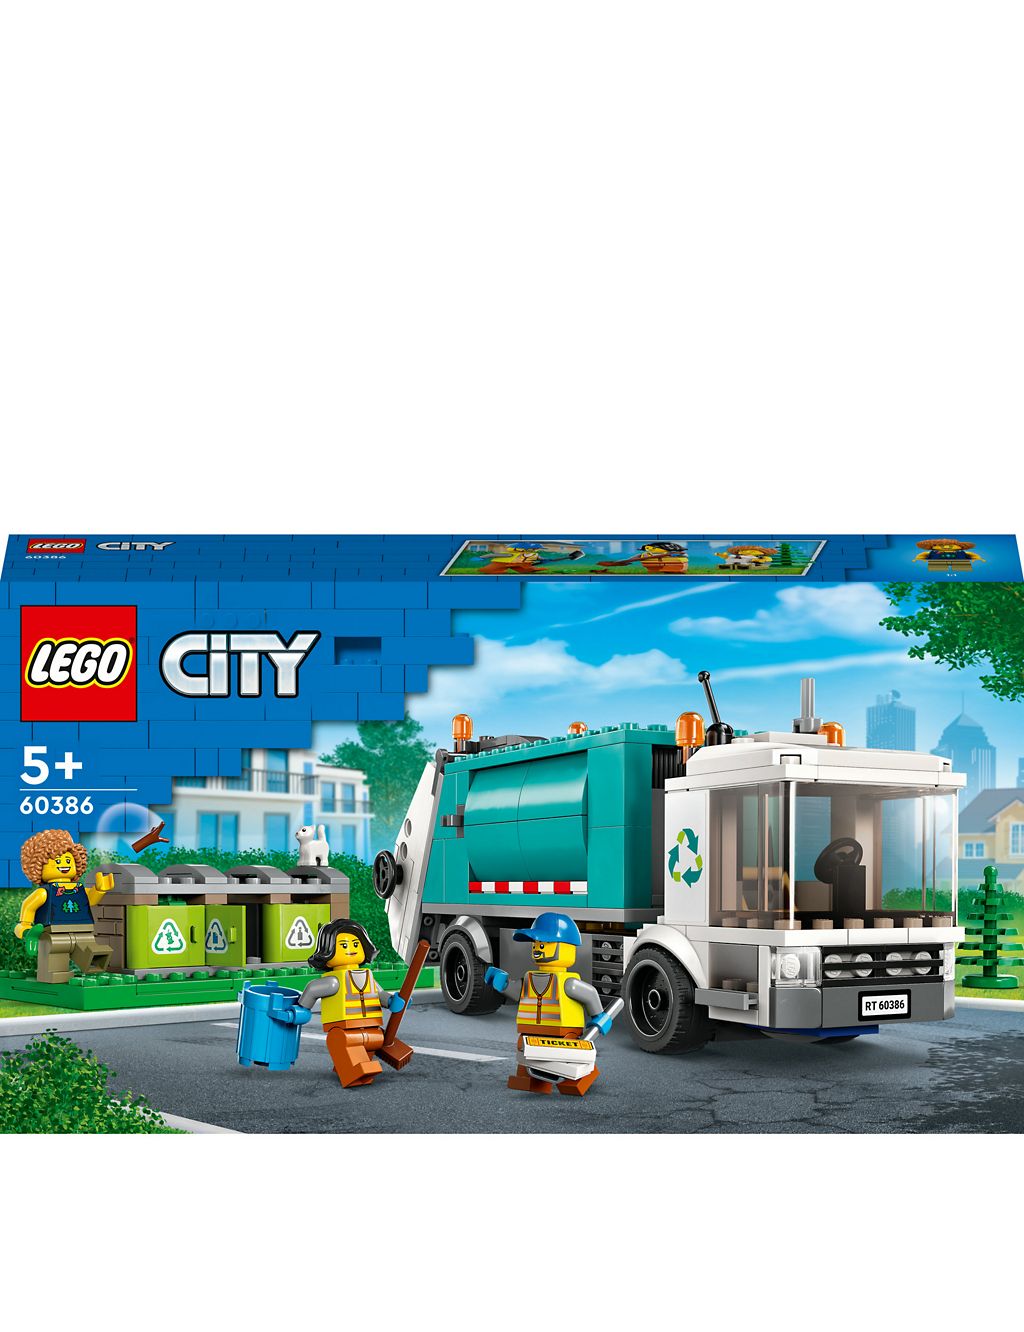 LEGO City Recycling Truck Bin Lorry Toy 60386 (5+ Yrs) 1 of 5